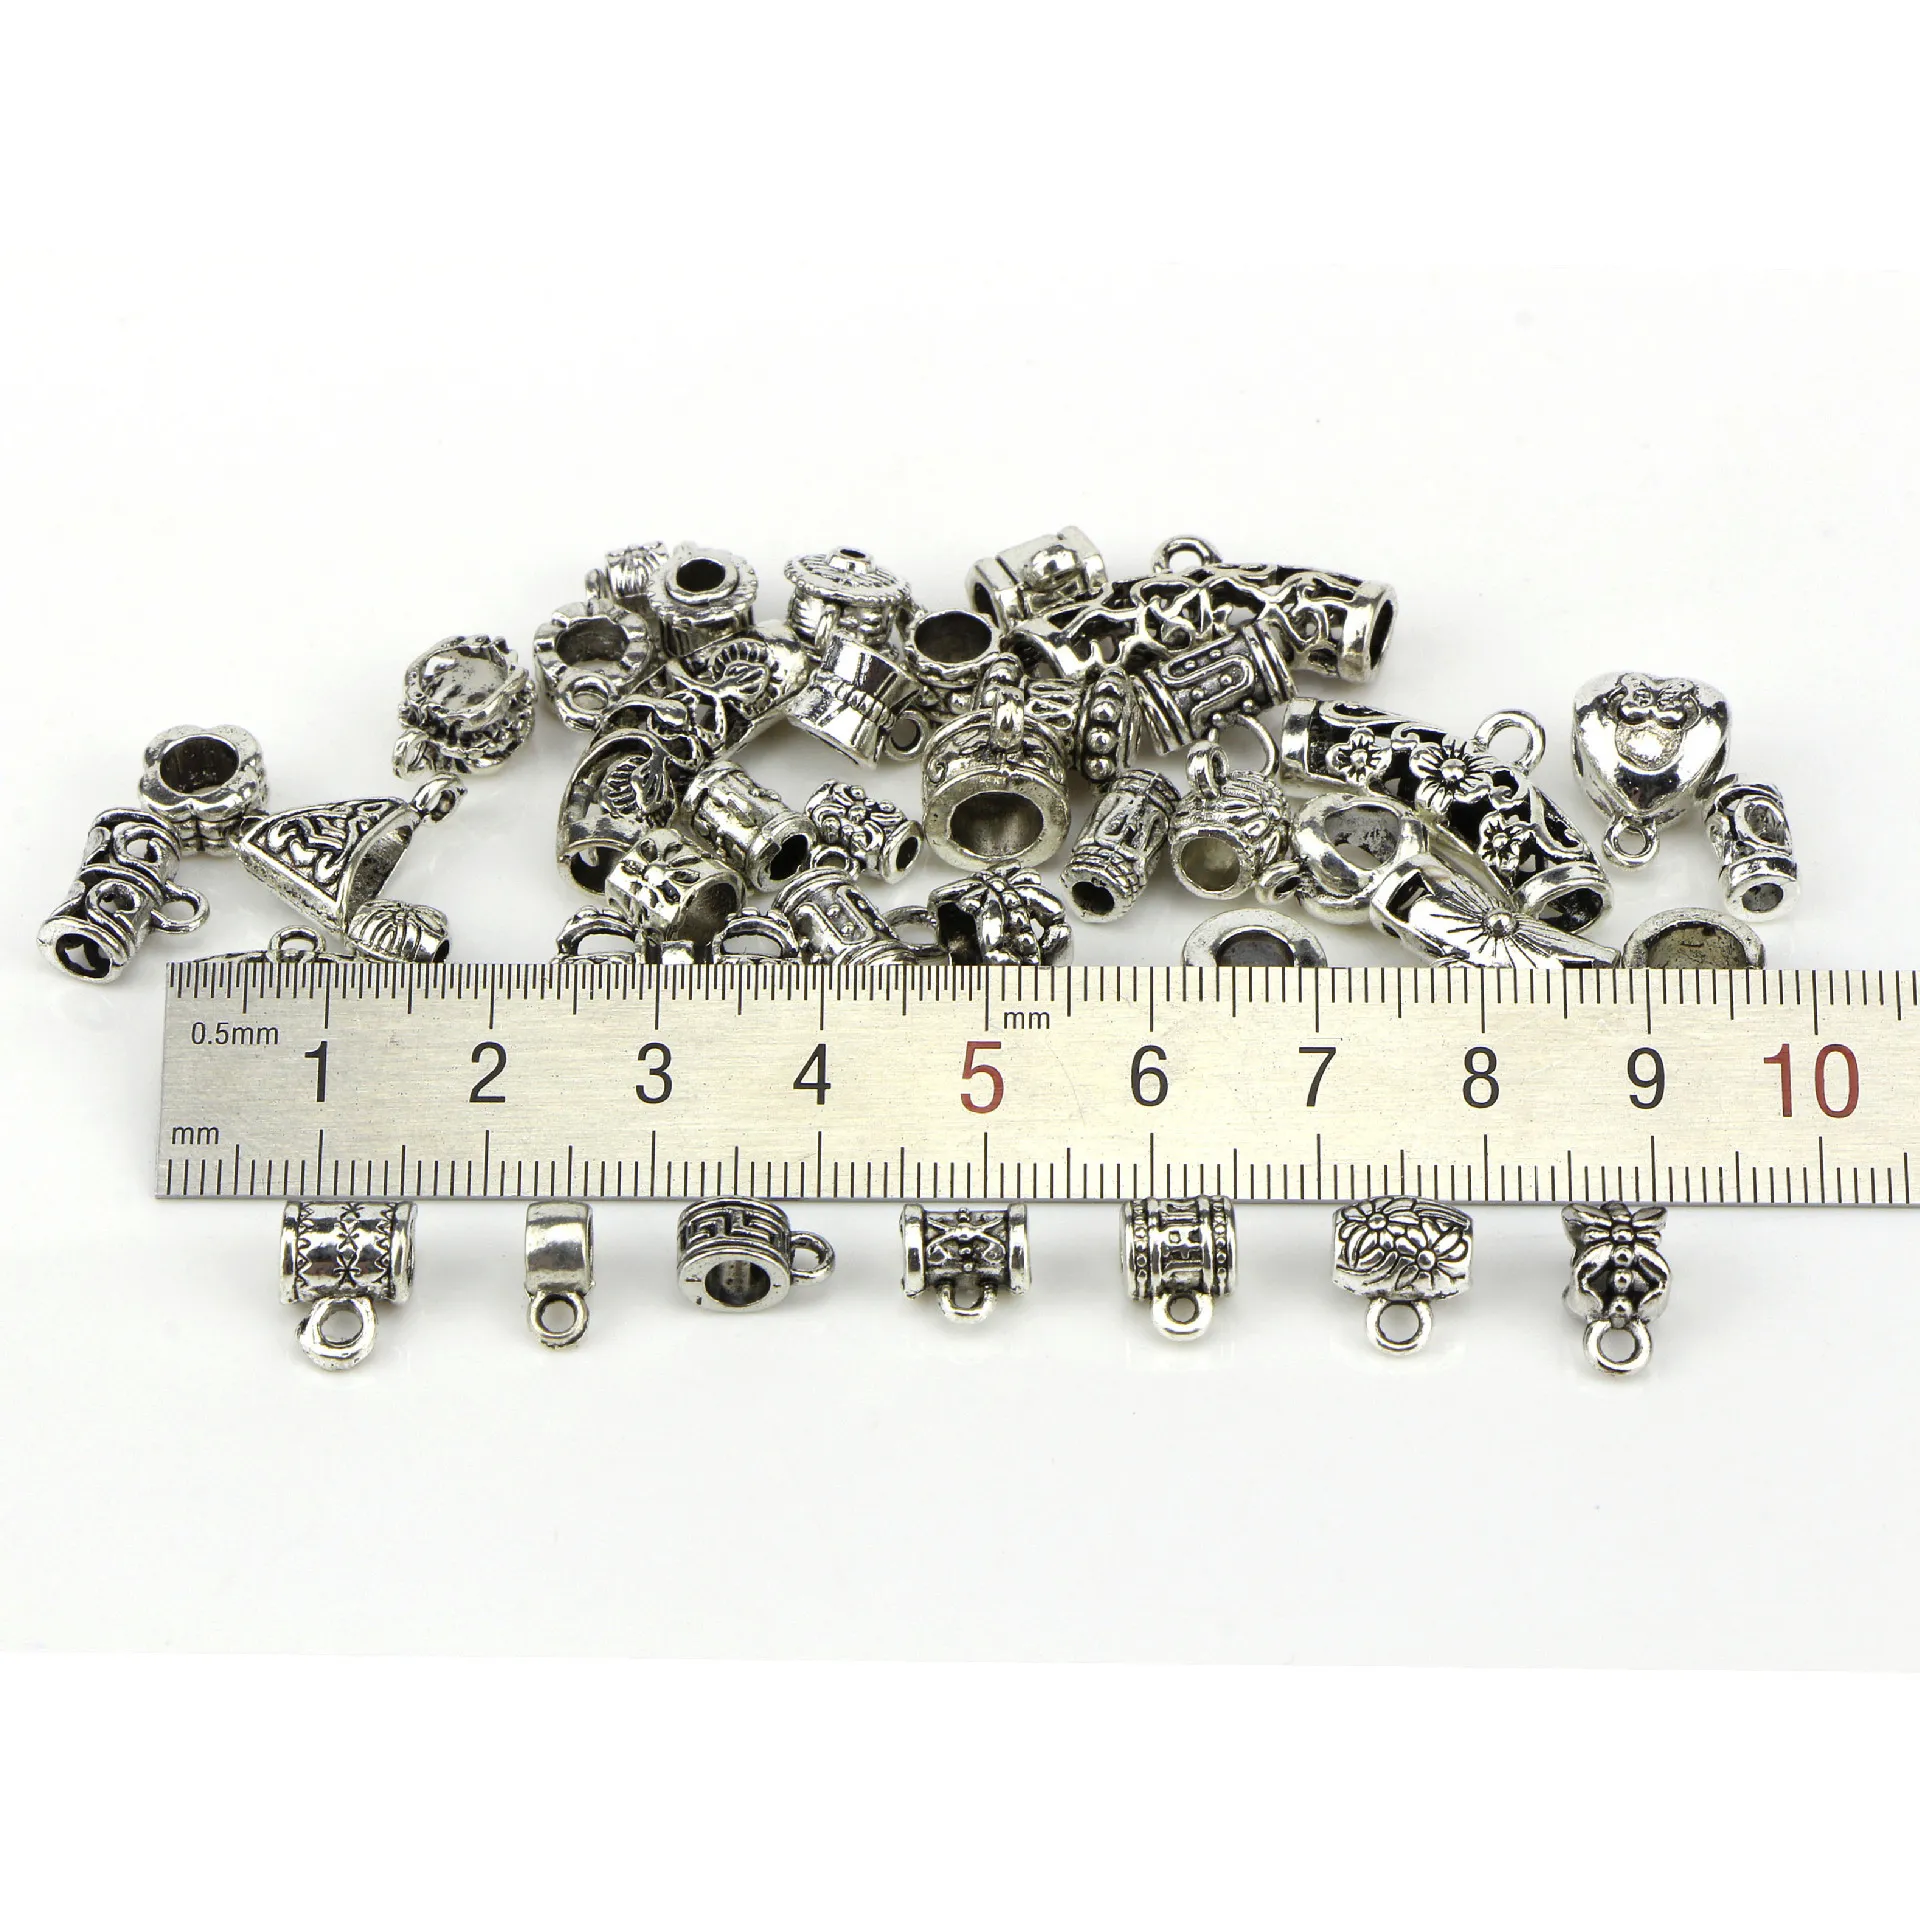  40pcs Mixed Stainless Steel Charms for Jewelry Making